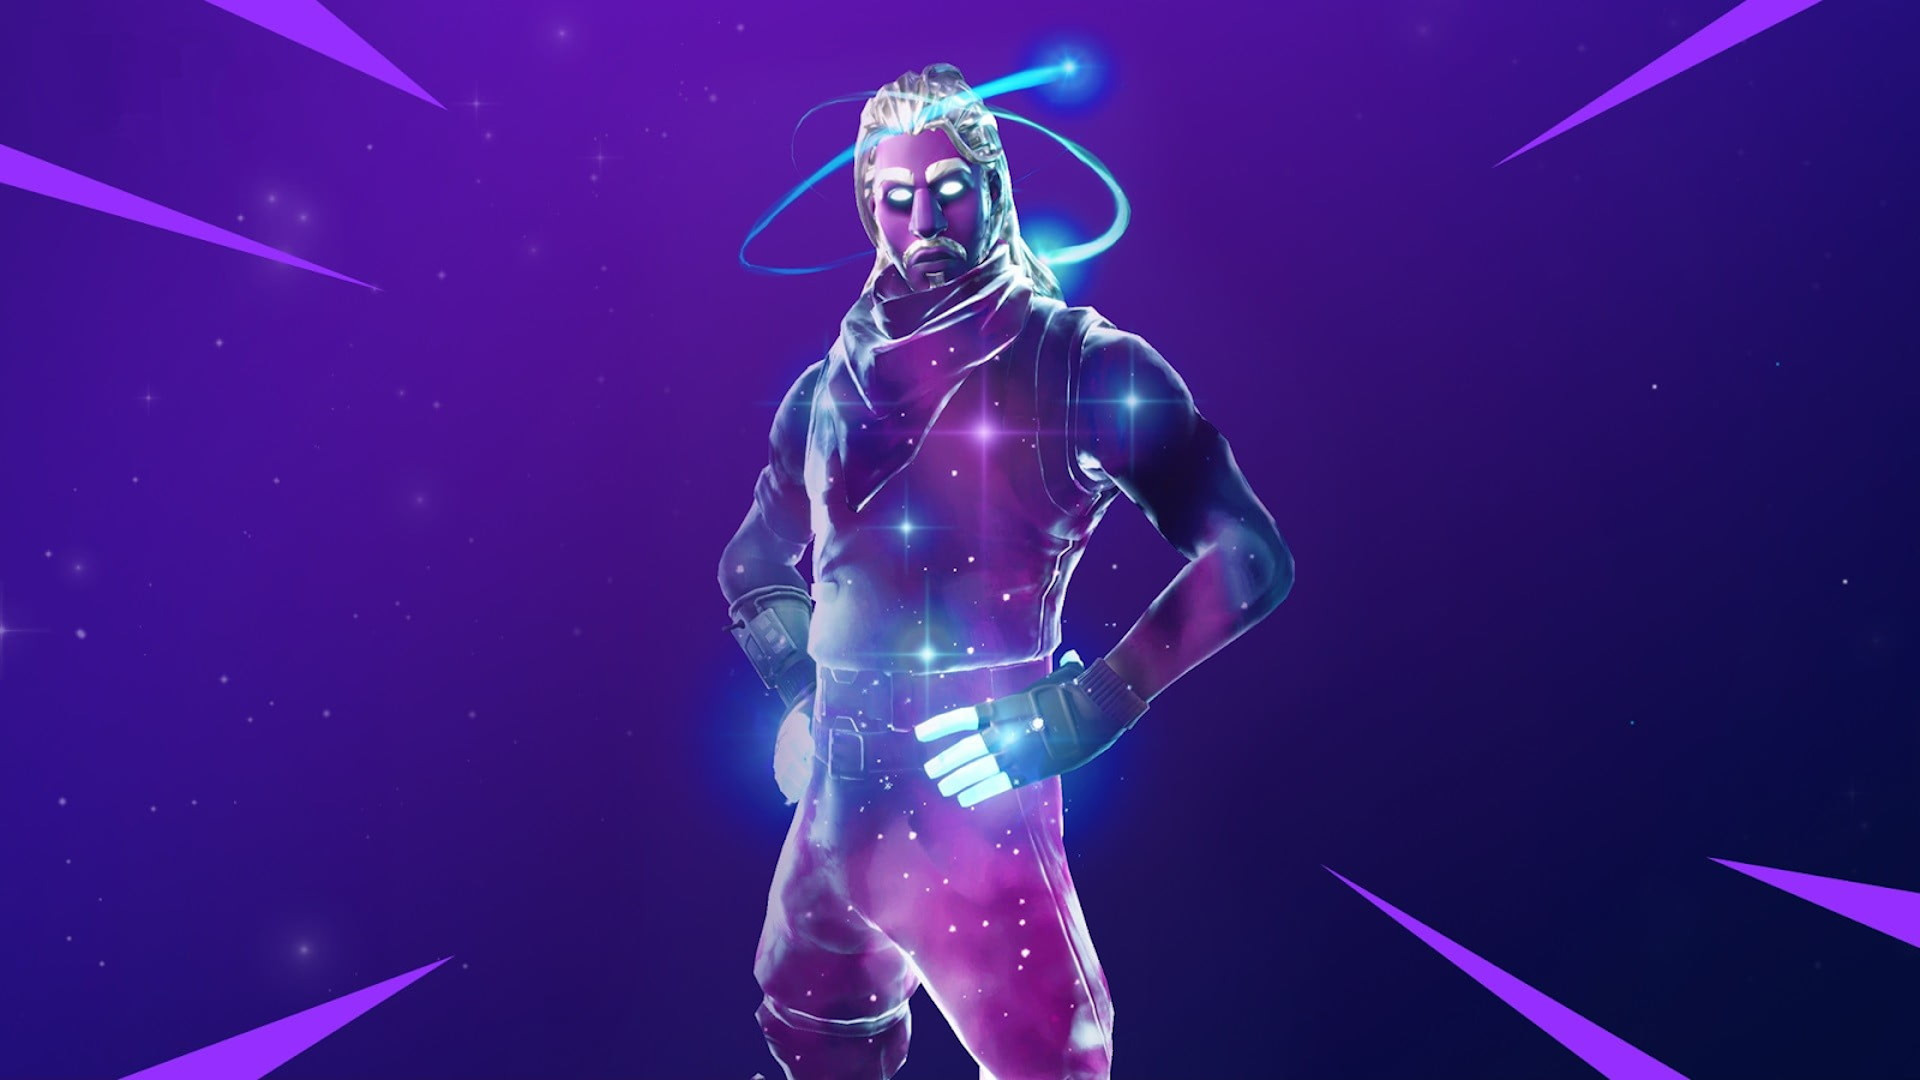 Rarest Fortnite skins: The Galaxy skin with their hands on their hips.